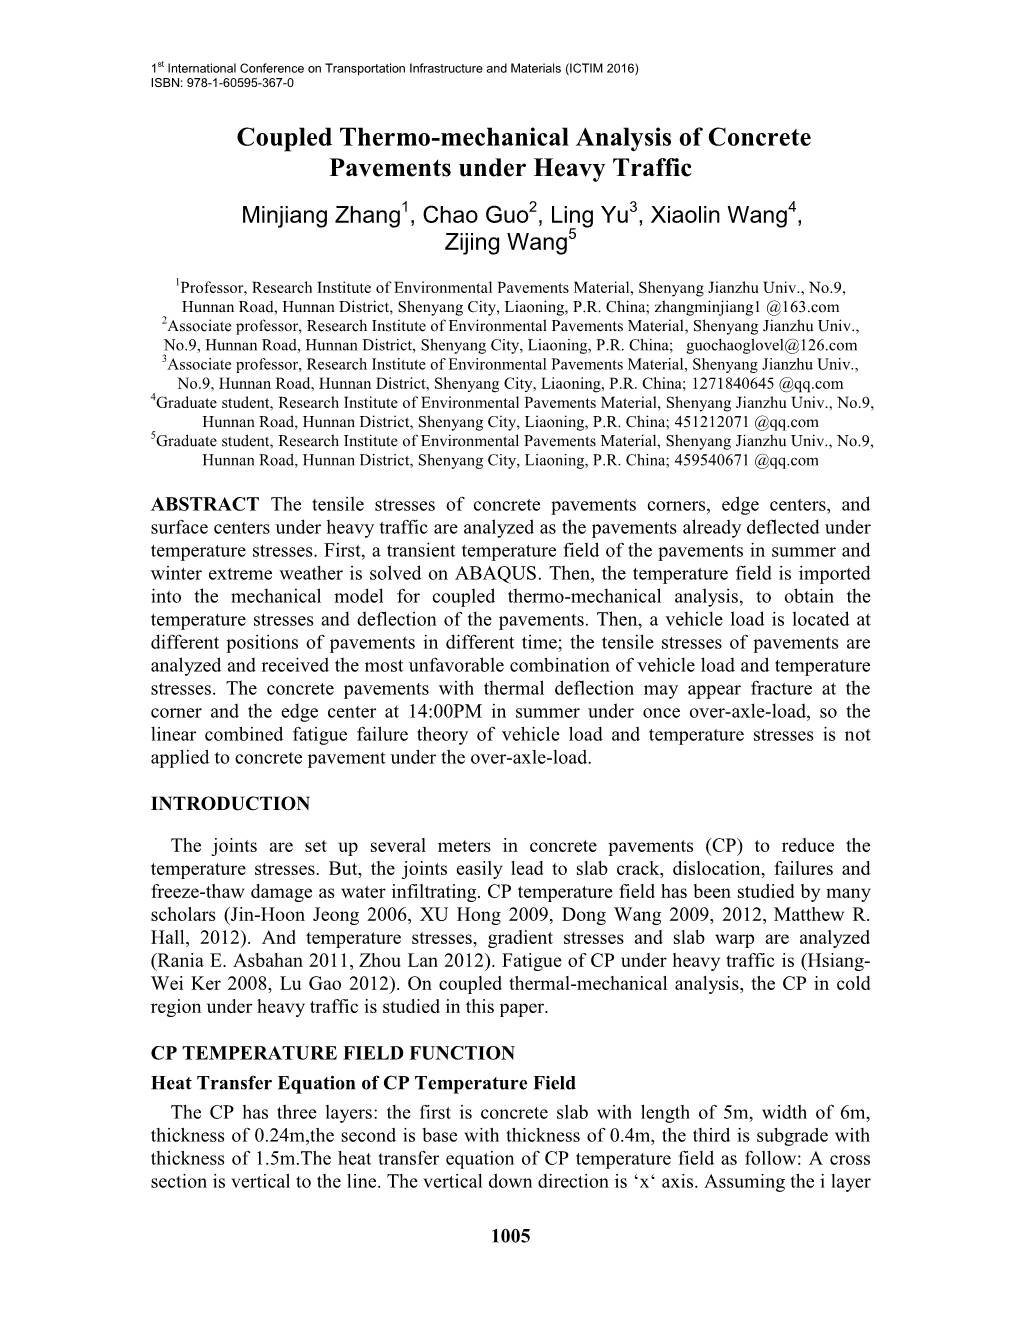 Coupled Thermo-Mechanical Analysis of Concrete Pavements Under Heavy Traffic